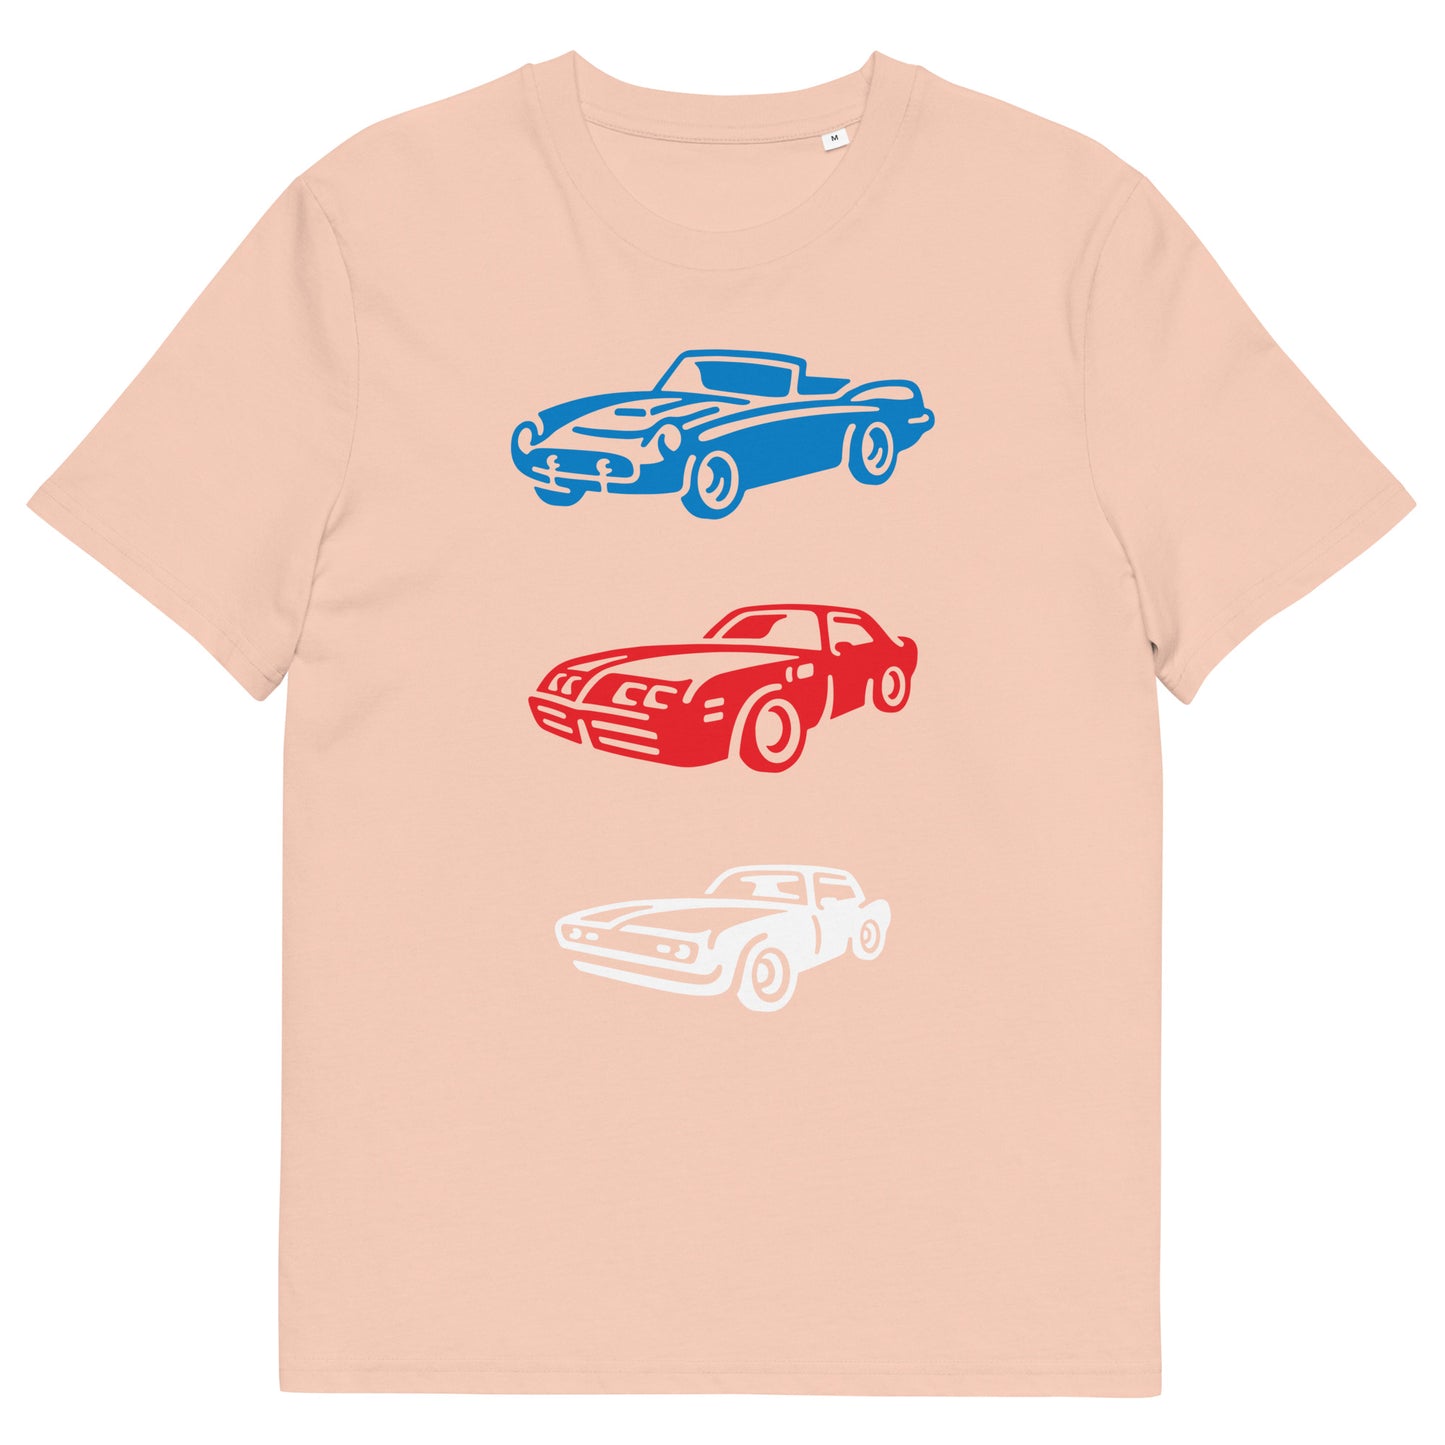 Unisex Red White and Blue Car Organic cotton t-shirt